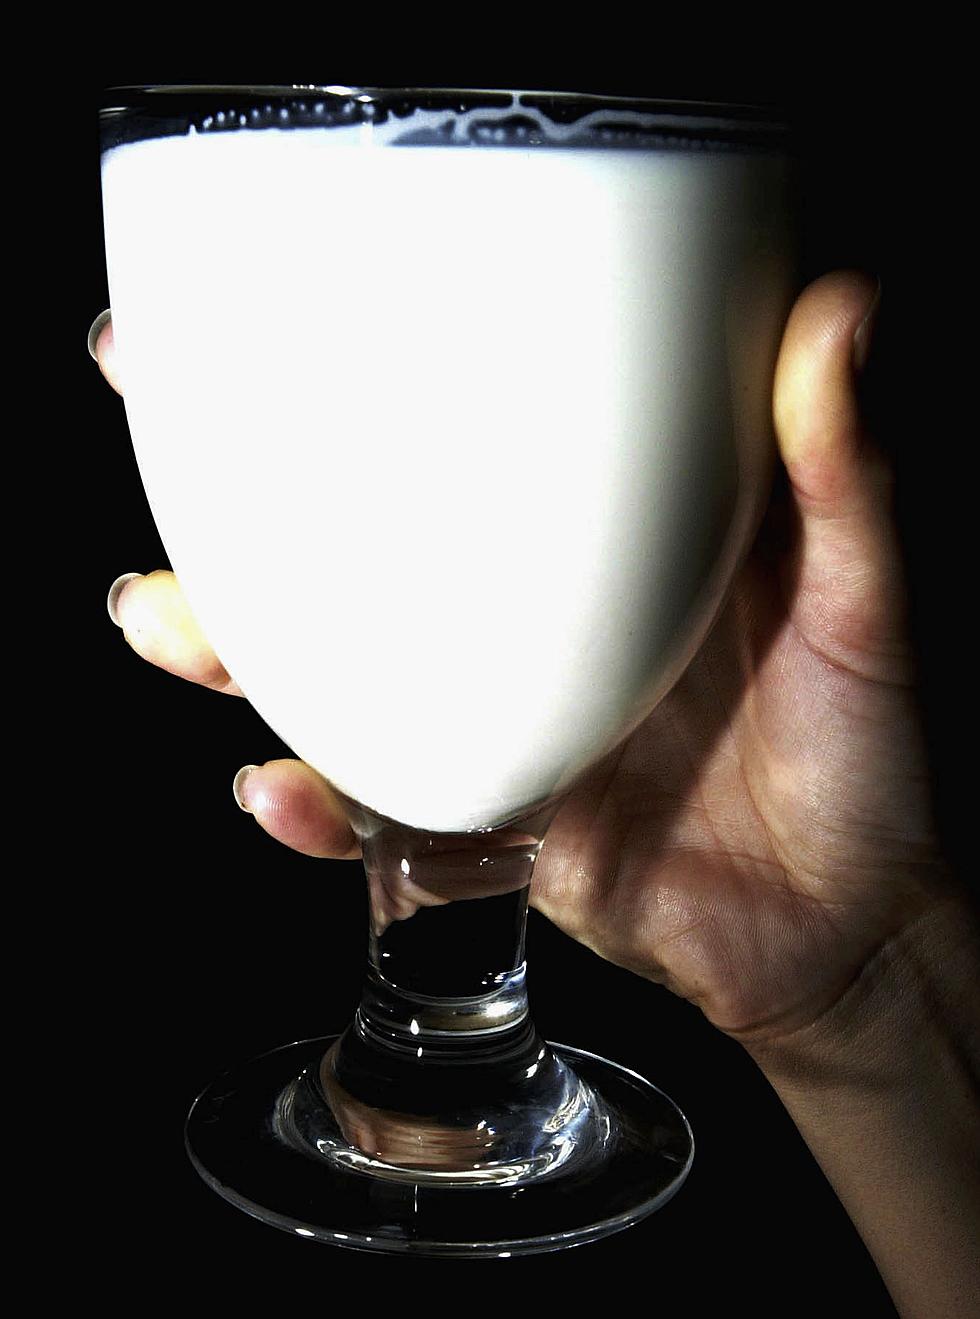 26 Things You Didn’t Know About Milk